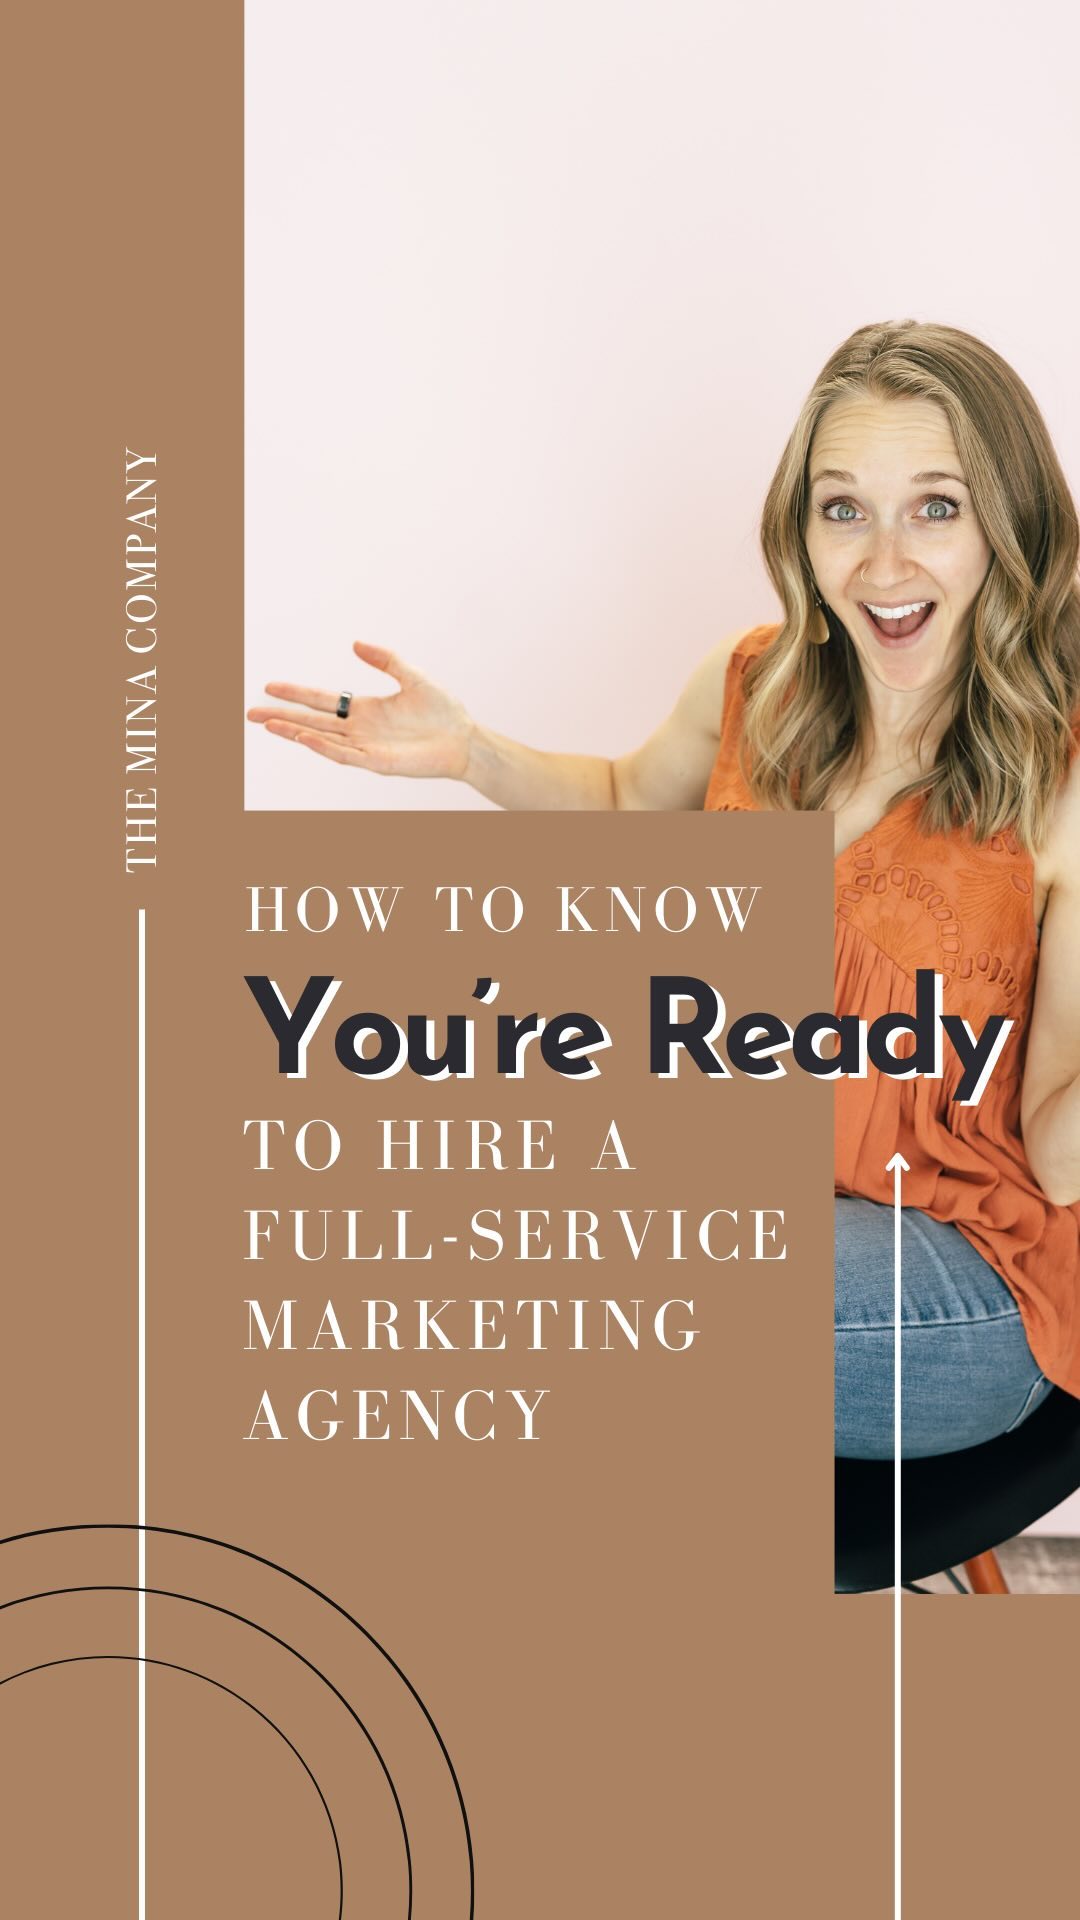 Truth 💣 : You’re feeling stuck, and your business isn’t thriving anymore because you’ve outgrown your marketing skillset🤭 Here’s a simple solution we know you already know about: hire a professional marketing agency.

Today, we are sharing five signs that you’re ready to invest in a full-service marketing

You’ve honed in on what you do best, and it’s time to pass the marketing baton to those who specialize in it — us. We’ll bring back your clarity and help you achieve intentional growth in line with your unique business goals..🔍✨

If all these signs ring a bell, it’s high time we spoke! DM us today.

#marketingagencies #marketingforsmallbusinesses #timetolevelup #readyforthenextstep #expertinsights #marketingmatters #marketingupgrade #knowyourlimits #agencyready #diynomore #scalingyourbusiness #strategicmarketing #marketinggamechanger #businessgrowth